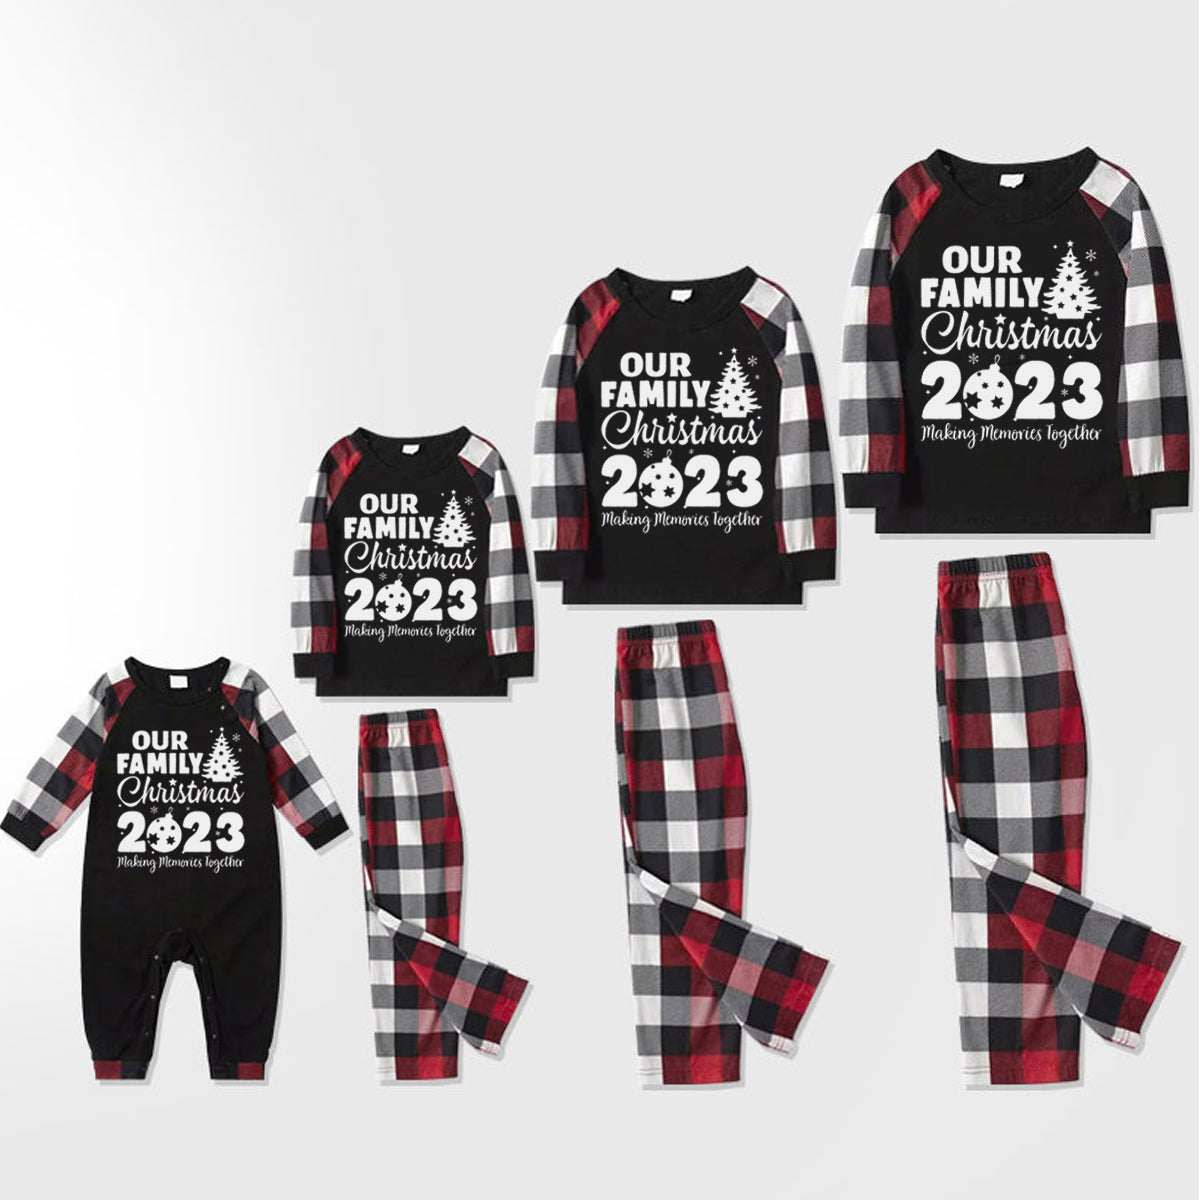 Christmas Hat and ‘Believe“ Letter Print Patterned Plaid Sleeve Contrast Tops and Red & Black & White Plaid Pants Family Matching Pajamas Set With Dog Bandana